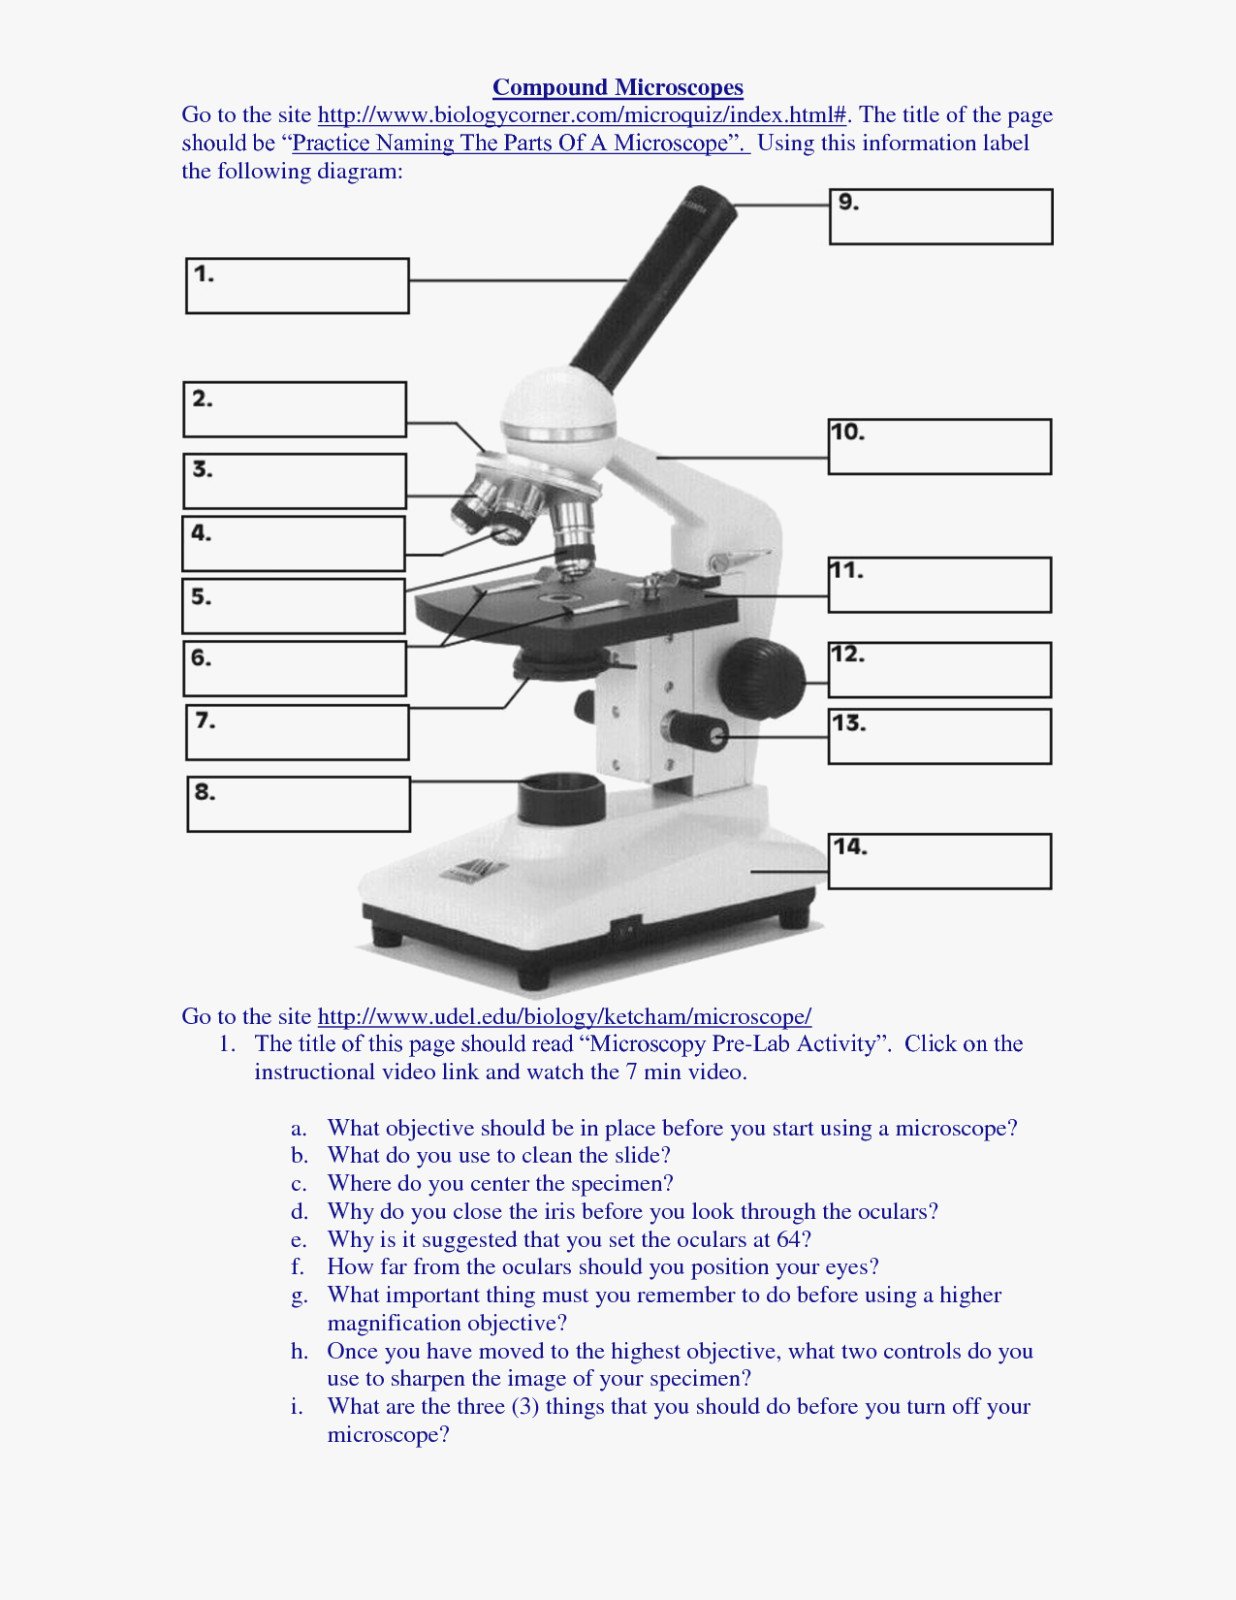 Microscope Parts and Use Worksheet Elegant now is the Time for You to Know the Truth